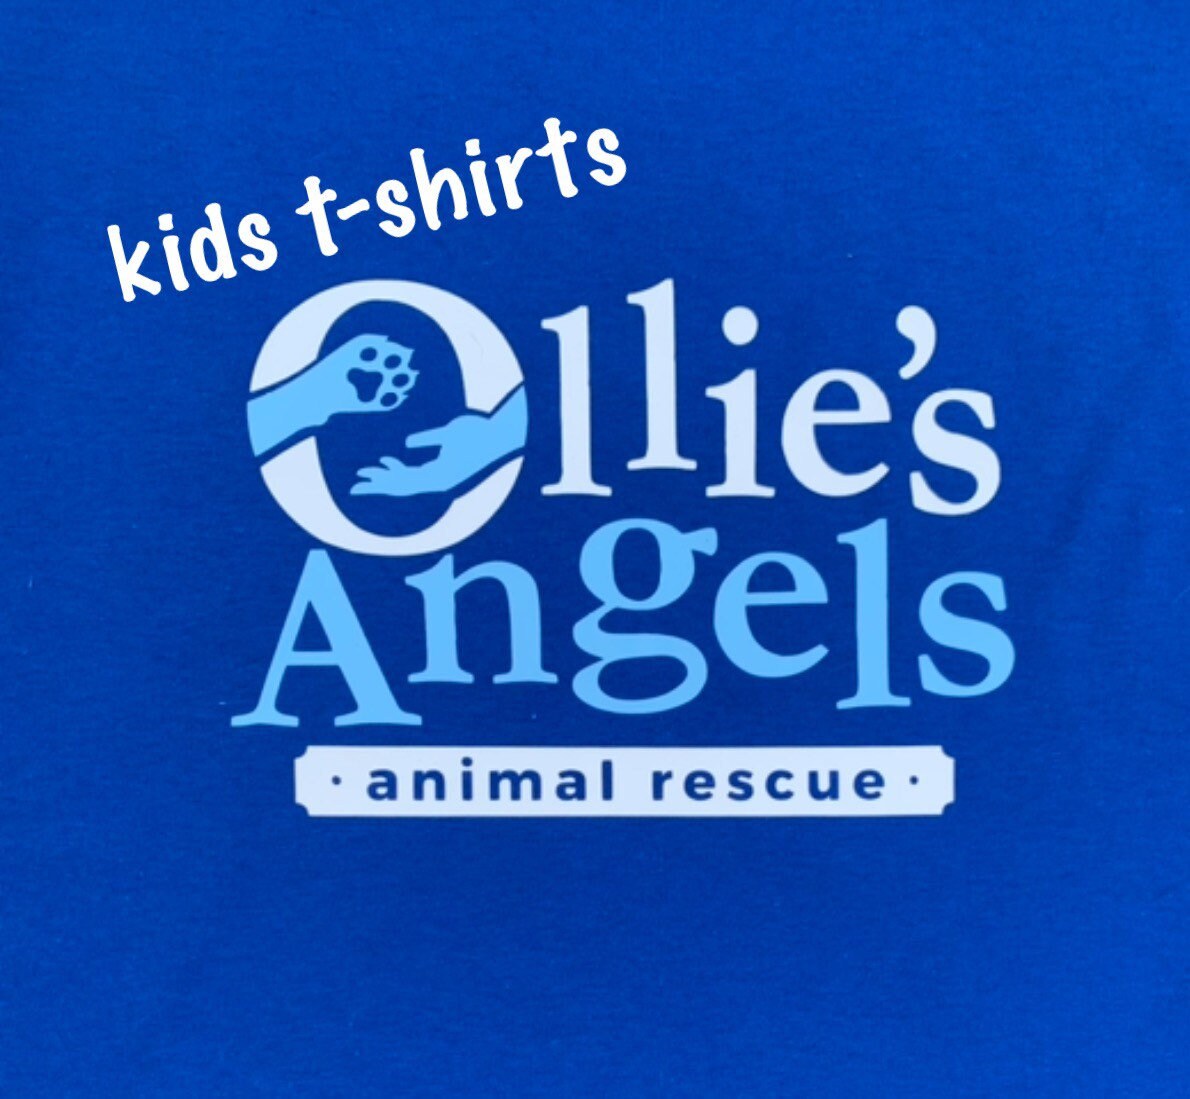 KIDS SHIRT Ollie's Angels Animal Rescue Shop for a - Etsy